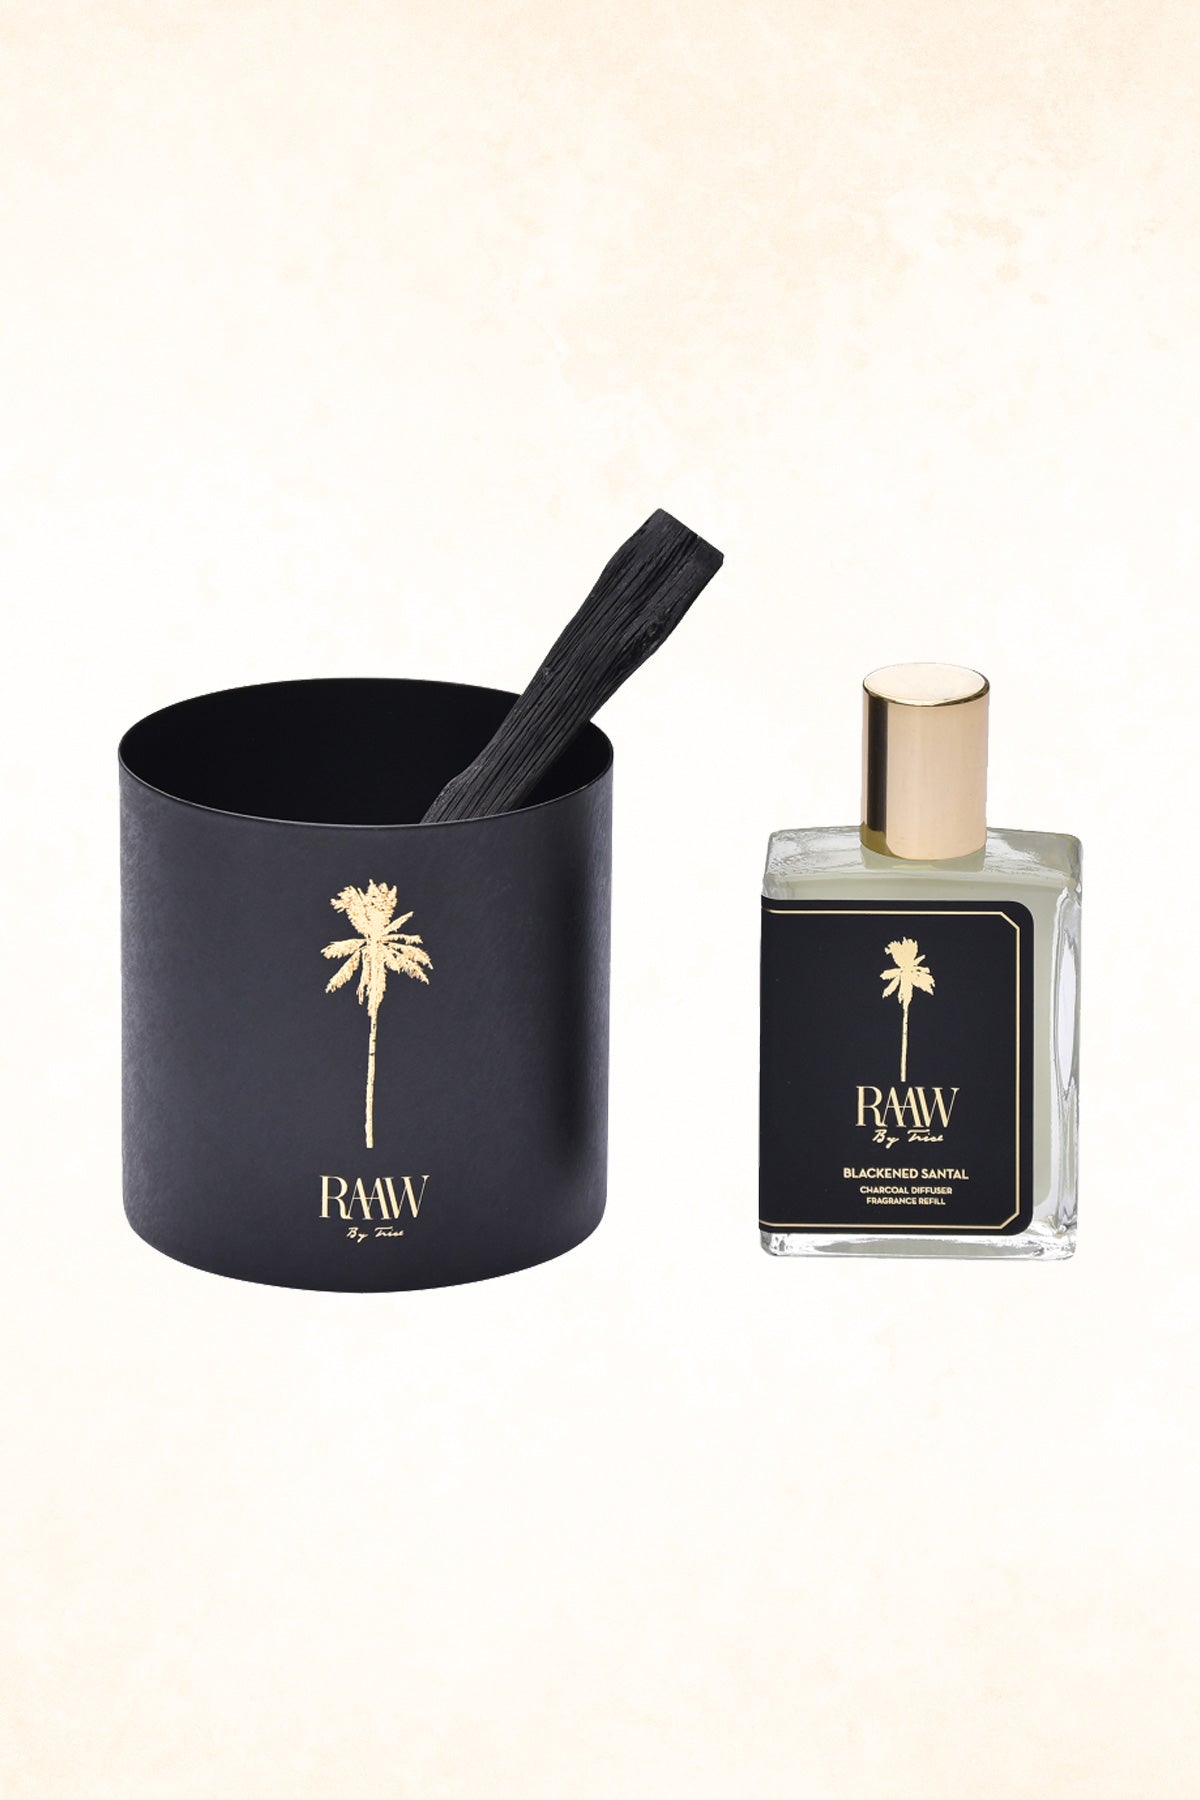 Raaw By Trice - Blackend Santal Charcoal Diffuser